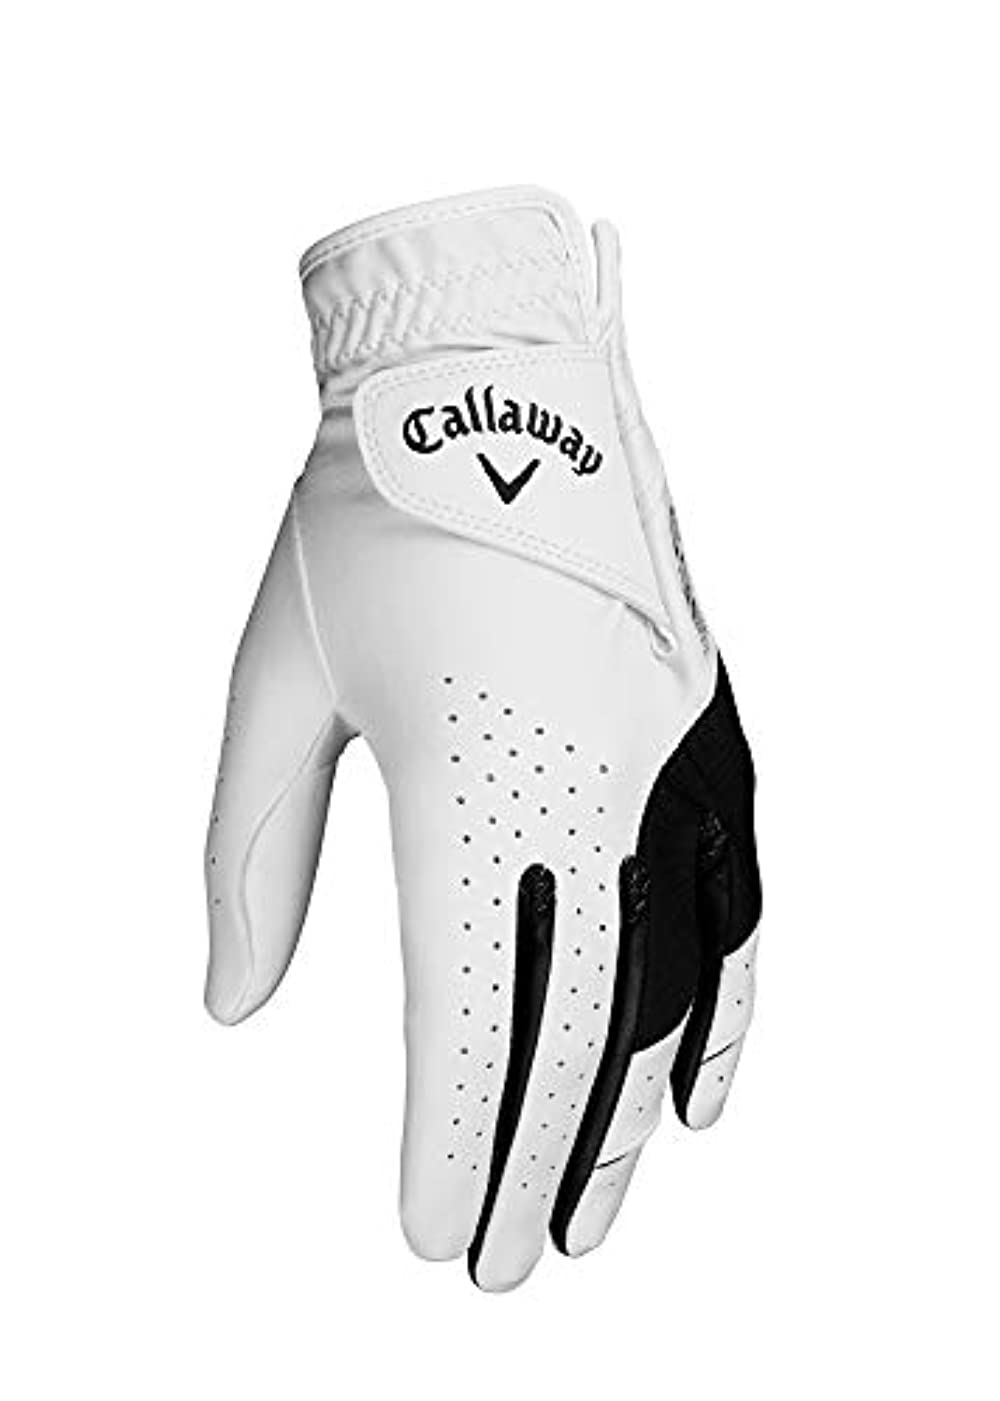 Callaway Golf Women s Weather Spann Premium Japanese Synthetic Golf Glove Small Single White Worn on Left Hand - image 1 of 2